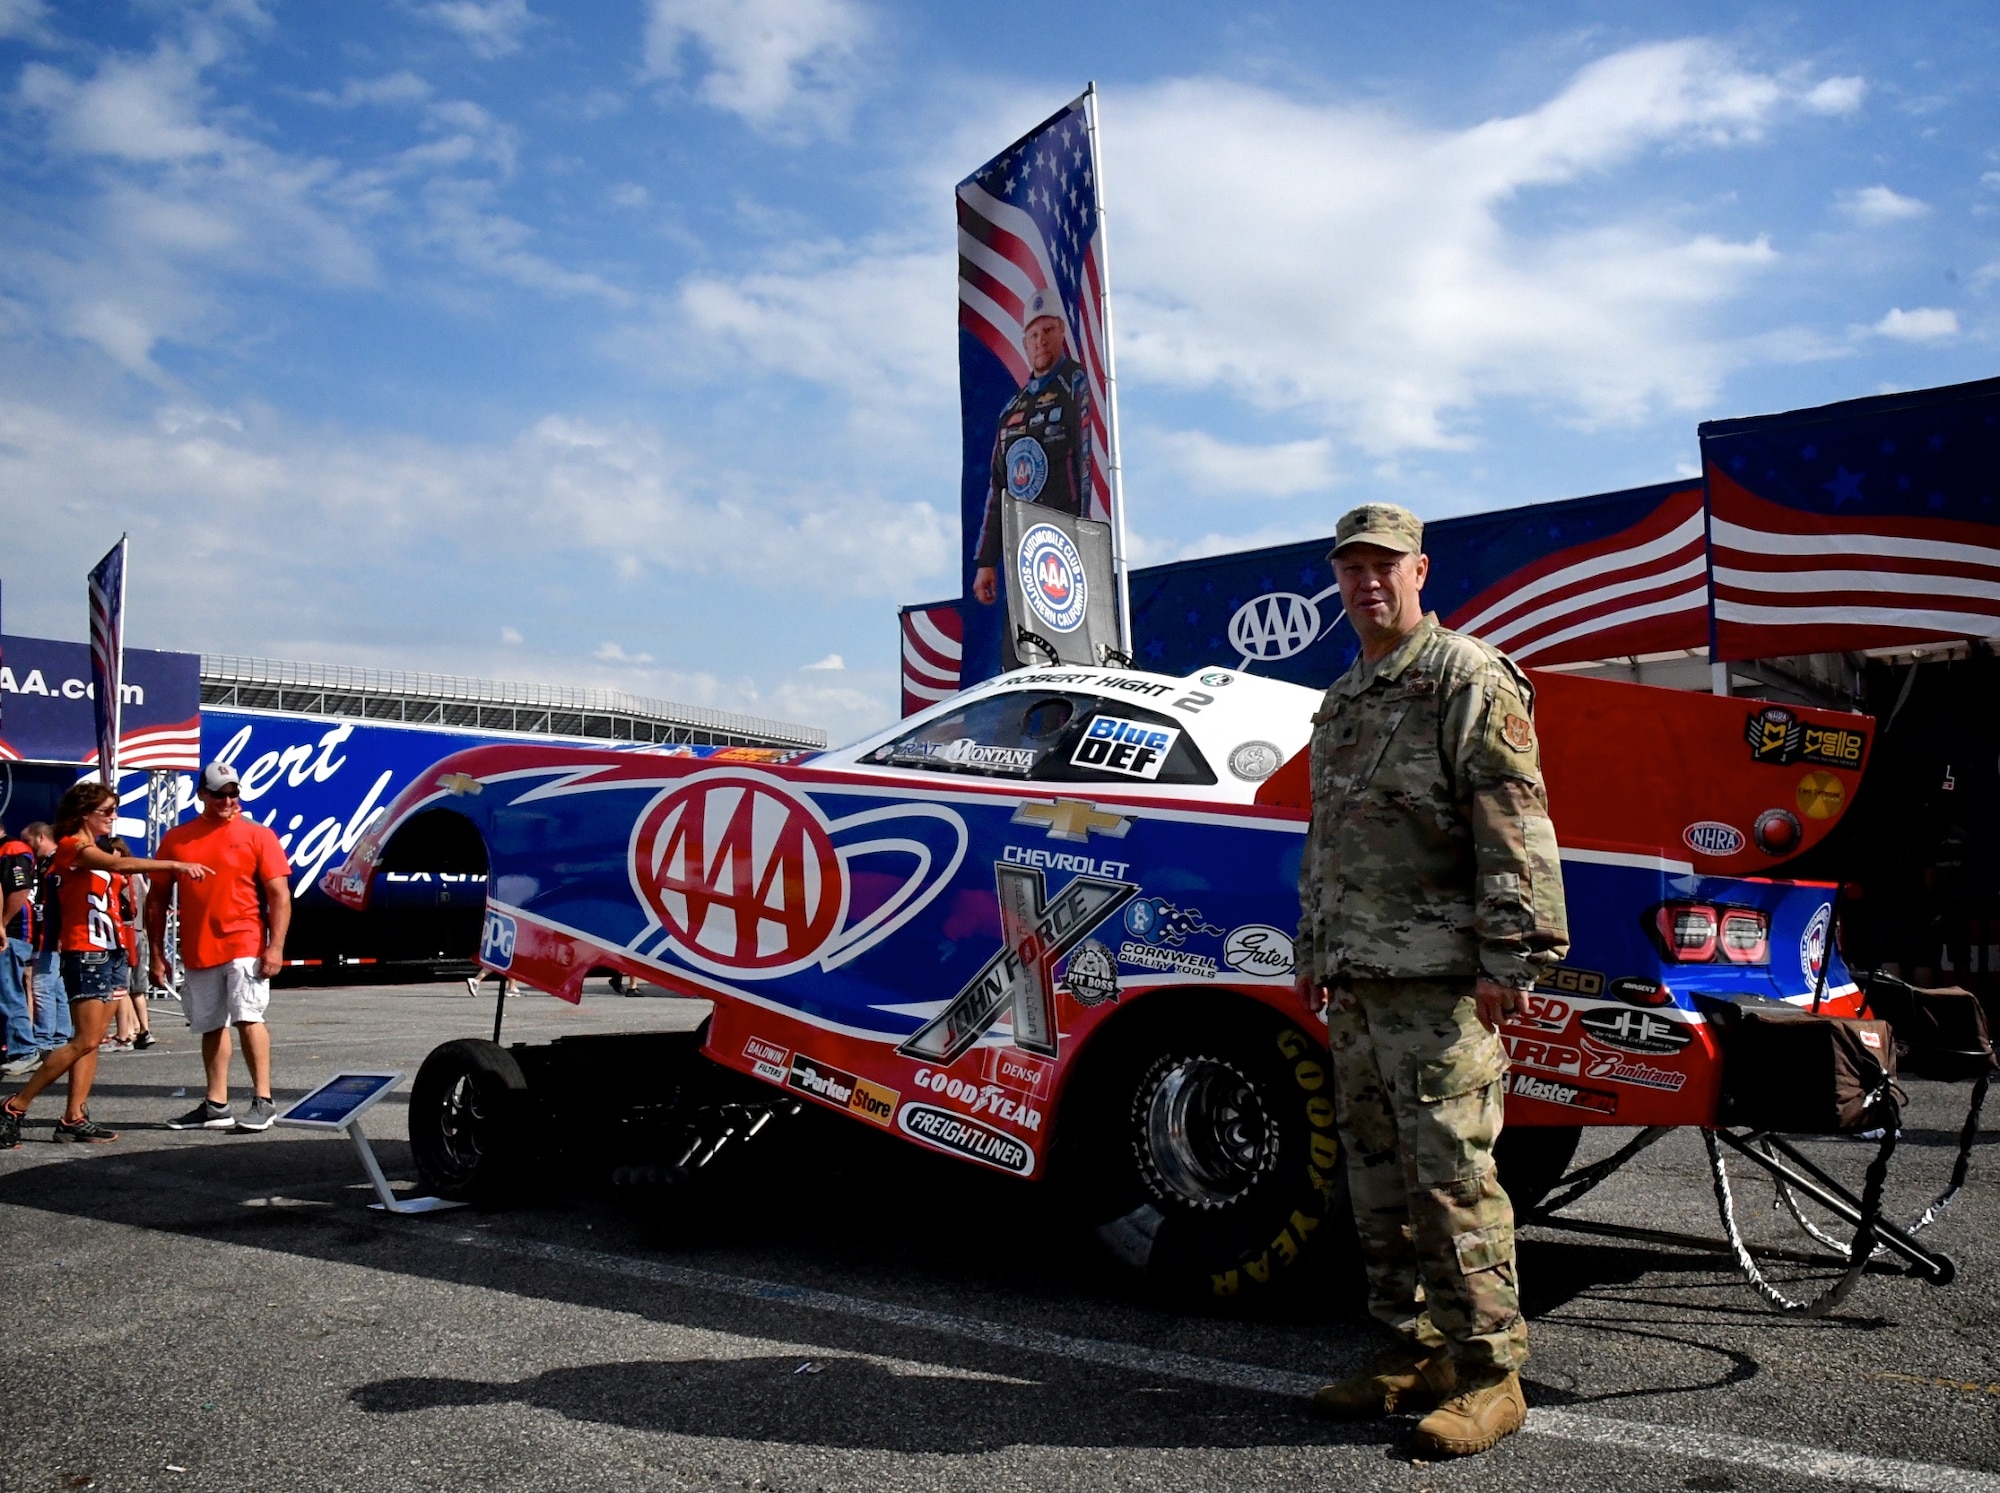 The National Hot Rod Association held their Midwest Nationals at the World Wide Technology Raceway at Gateway Motorsports, Madison Illinois, with Lt. Col. William McLeod, 932nd Maintenance Group commander, invited to help start the event as an honored guest, Sept. 29, 2019.  McLeod was brought on stage during the opening ceremony and presented an NHRA challenge coin and waved to the cheering crowd.  The 932nd Airlift Wing is known as "the Gateway Wing" in the Air Force Reserve Command and flies four C-40 aircraft around the world for distinguished visitor airlift.  (U.S. Air Force photo by Lt. Col. Stan Paregien)